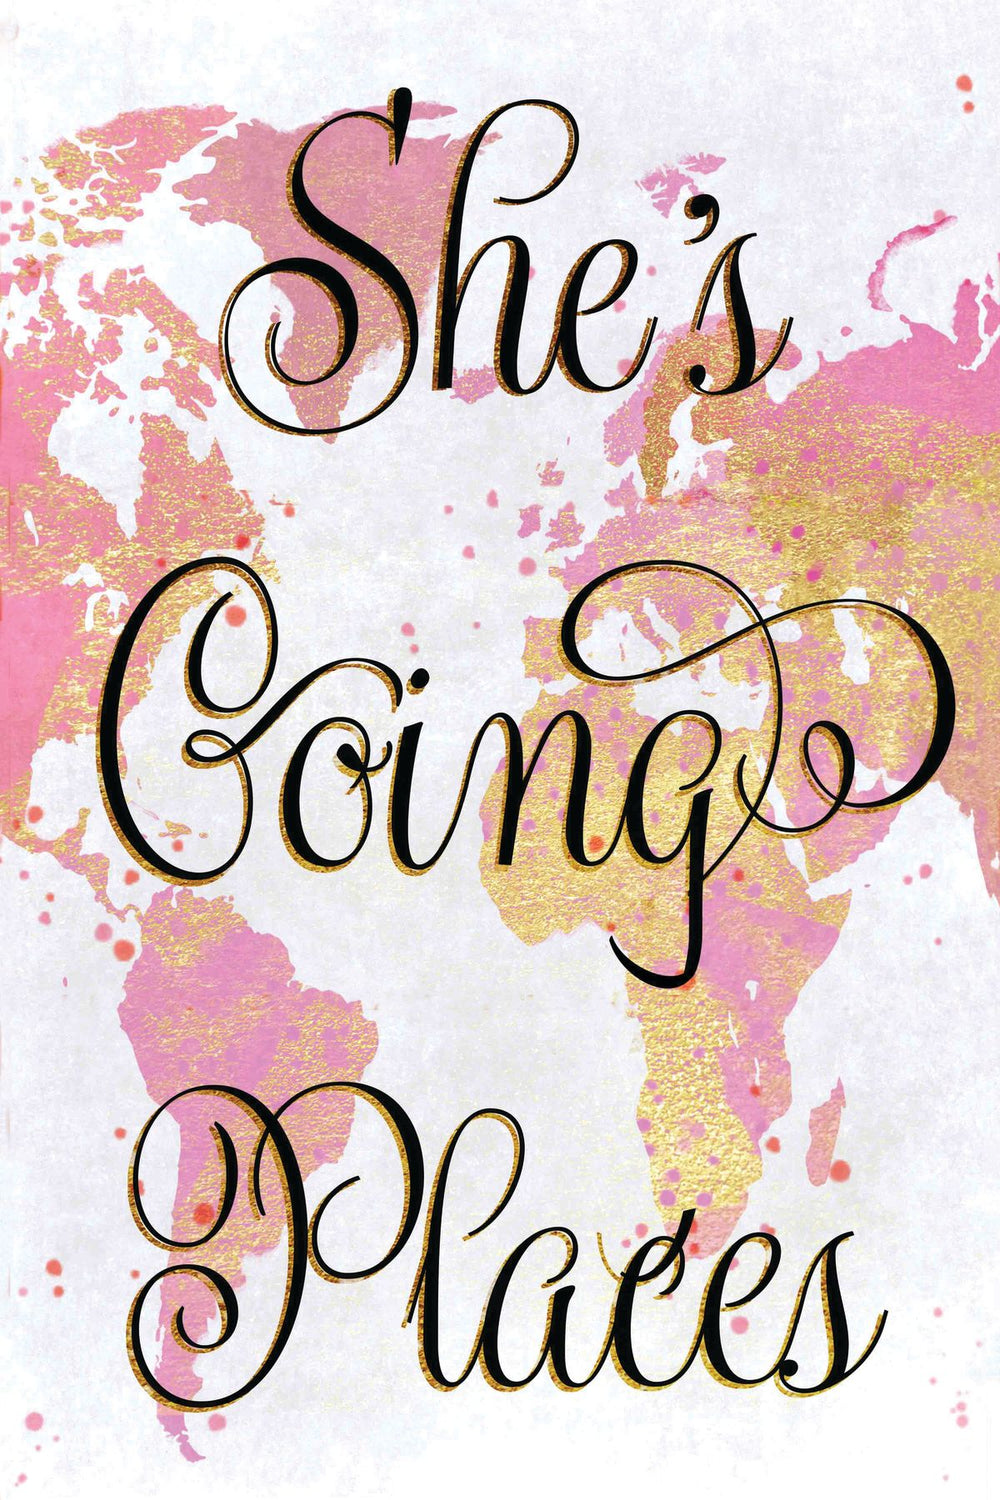 She's Going Places Typography